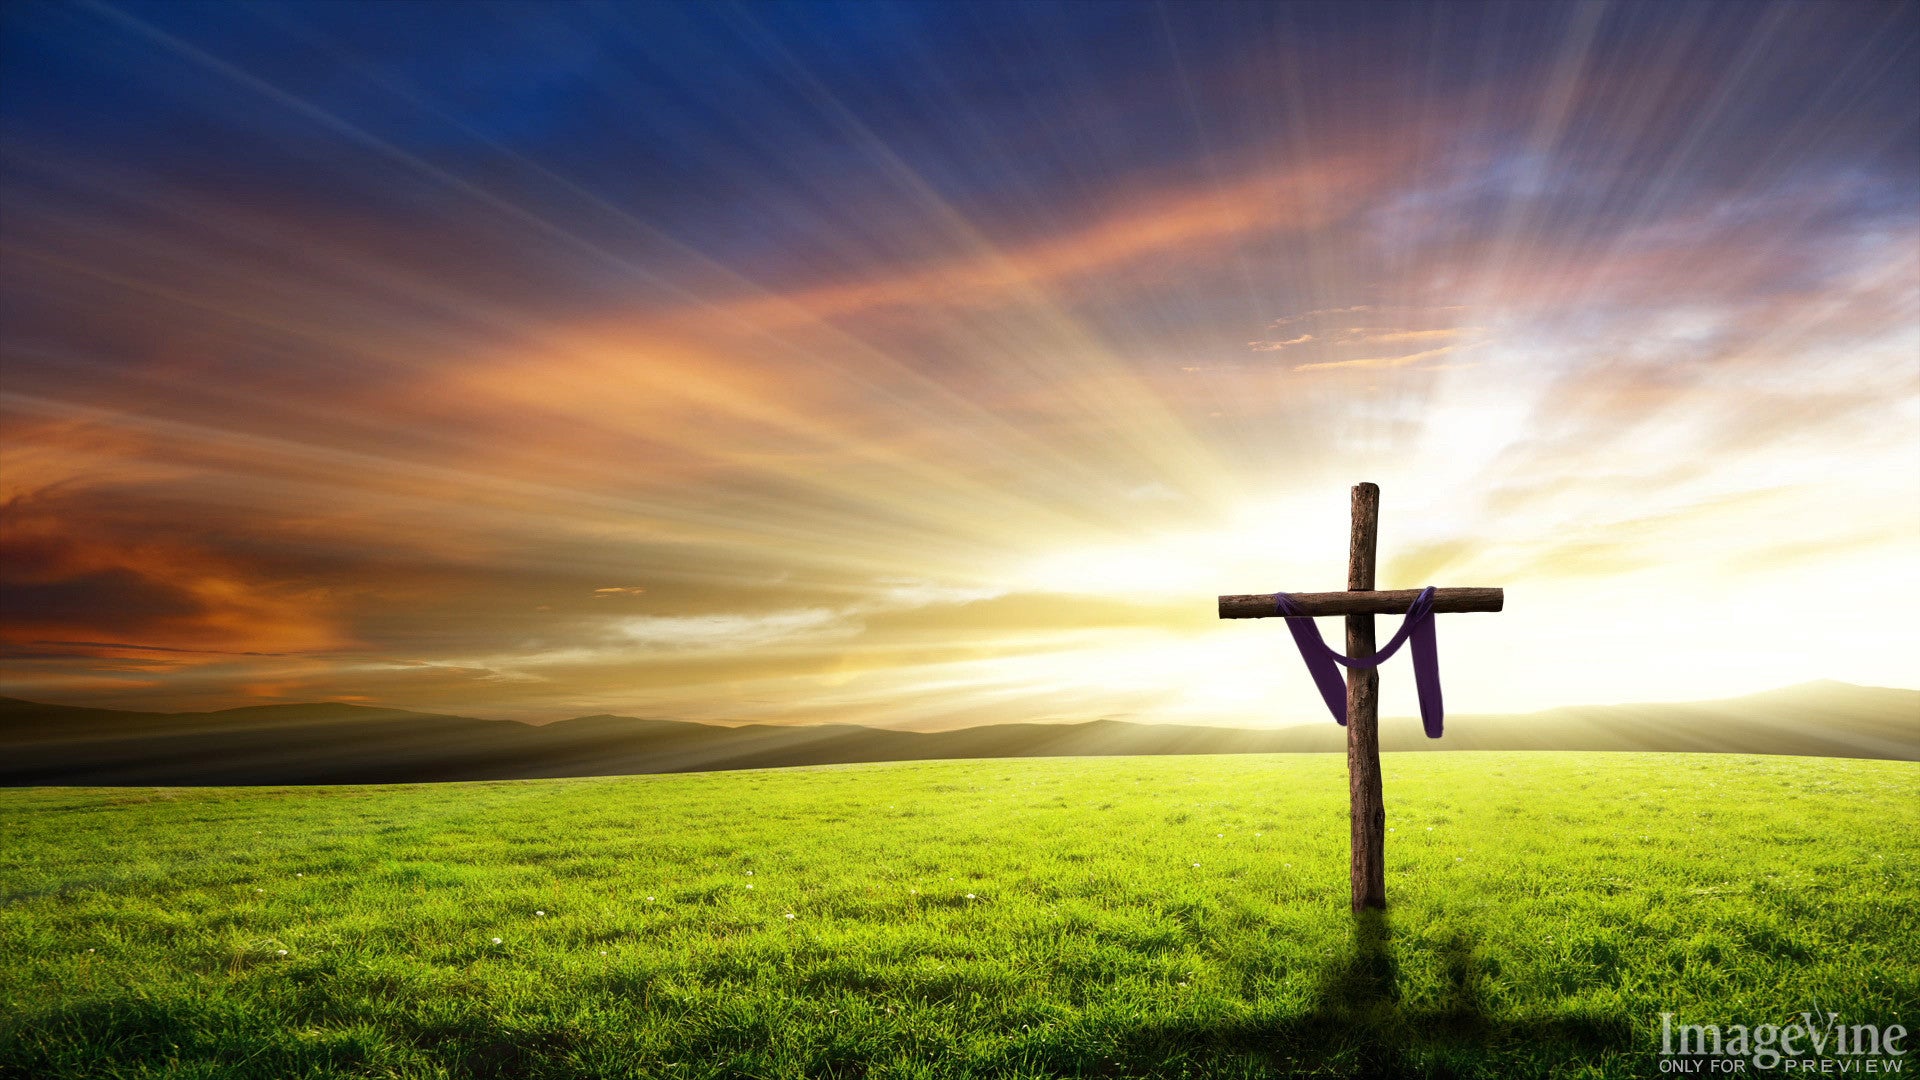 147168 Religious Easter Background Images Stock Photos  Vectors   Shutterstock